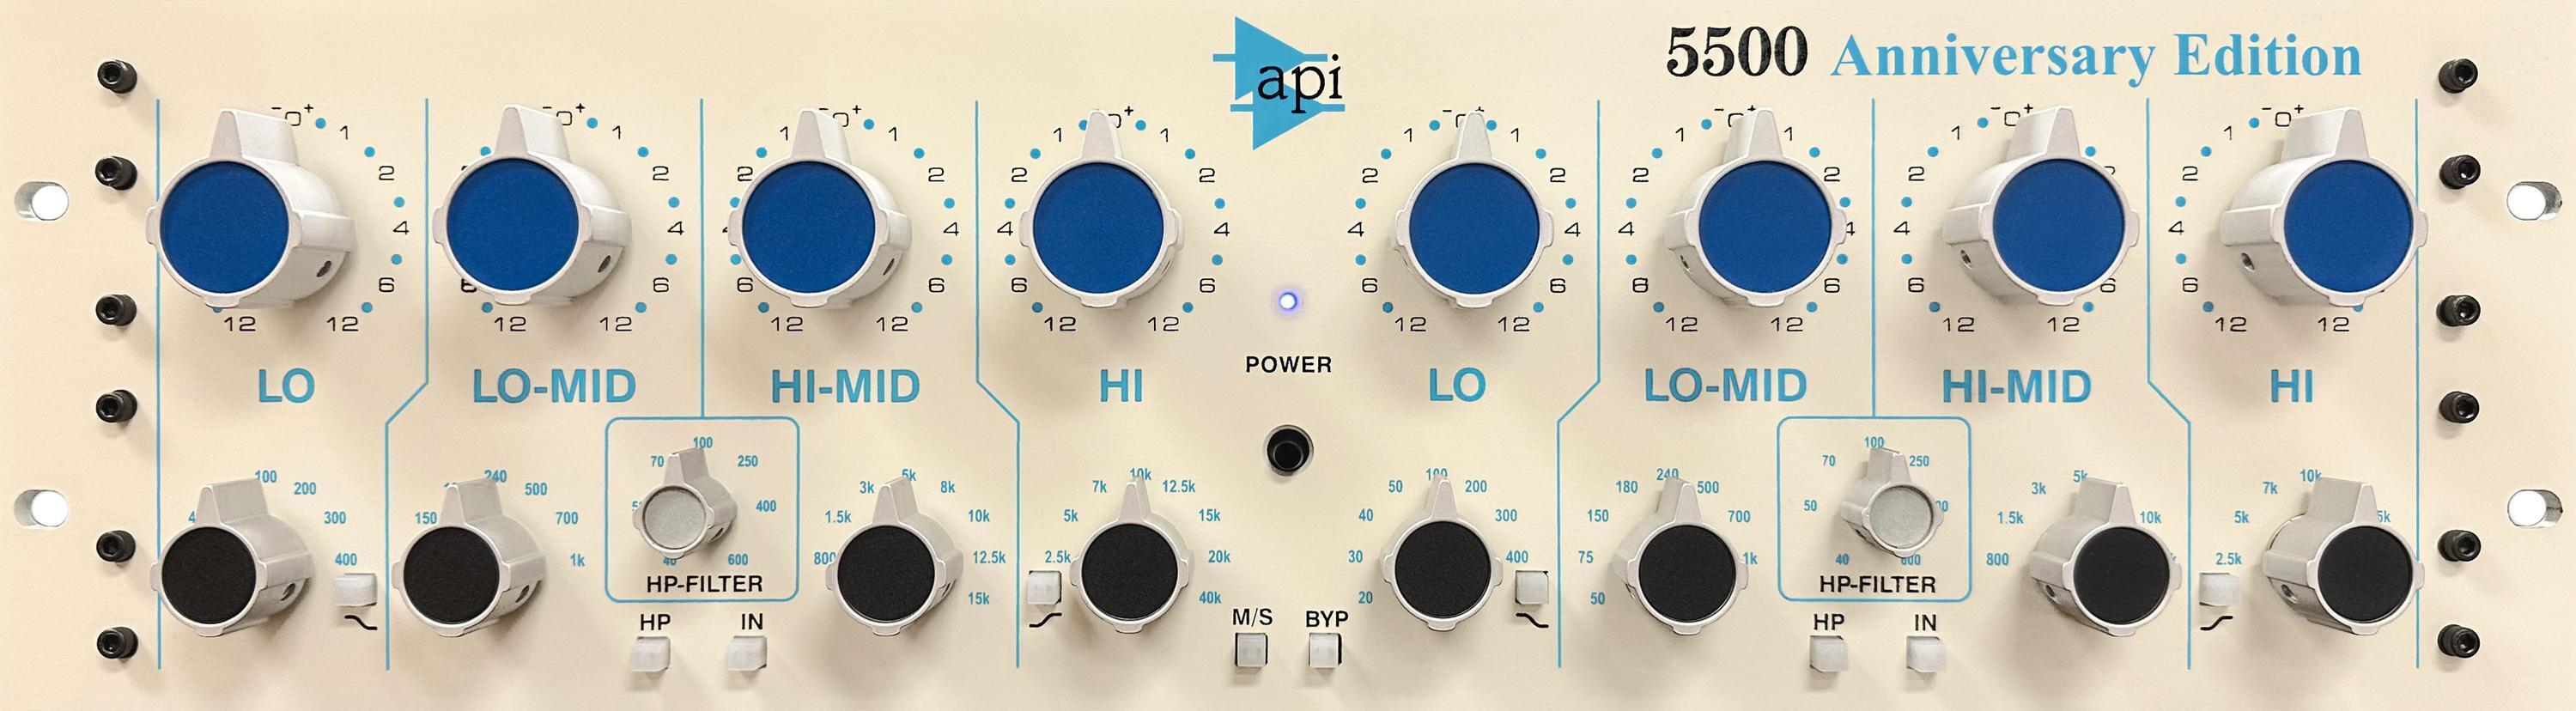 API 5500 Anniversary Edition Dual Equalizer | Sweetwater